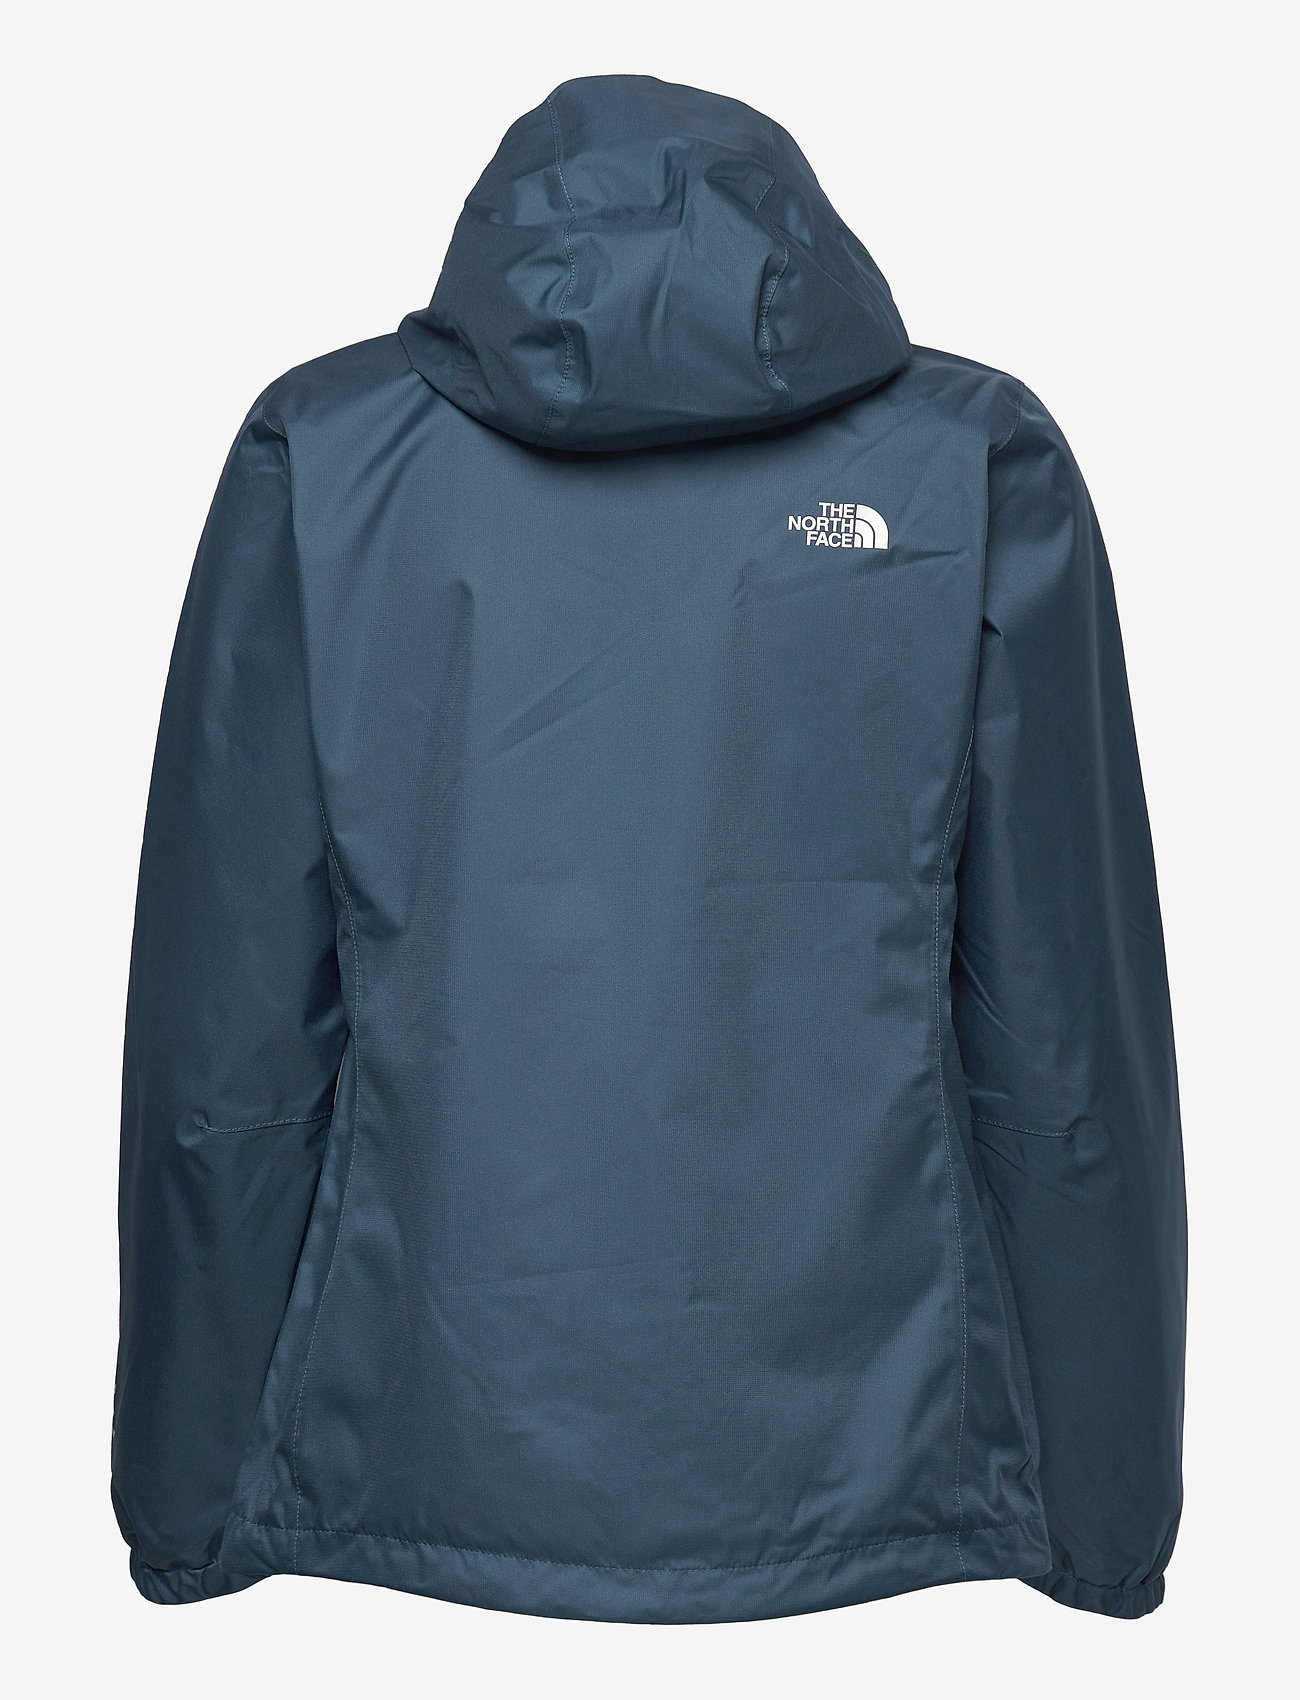 The North Face W Quest Jacket - Jackets | Boozt.com